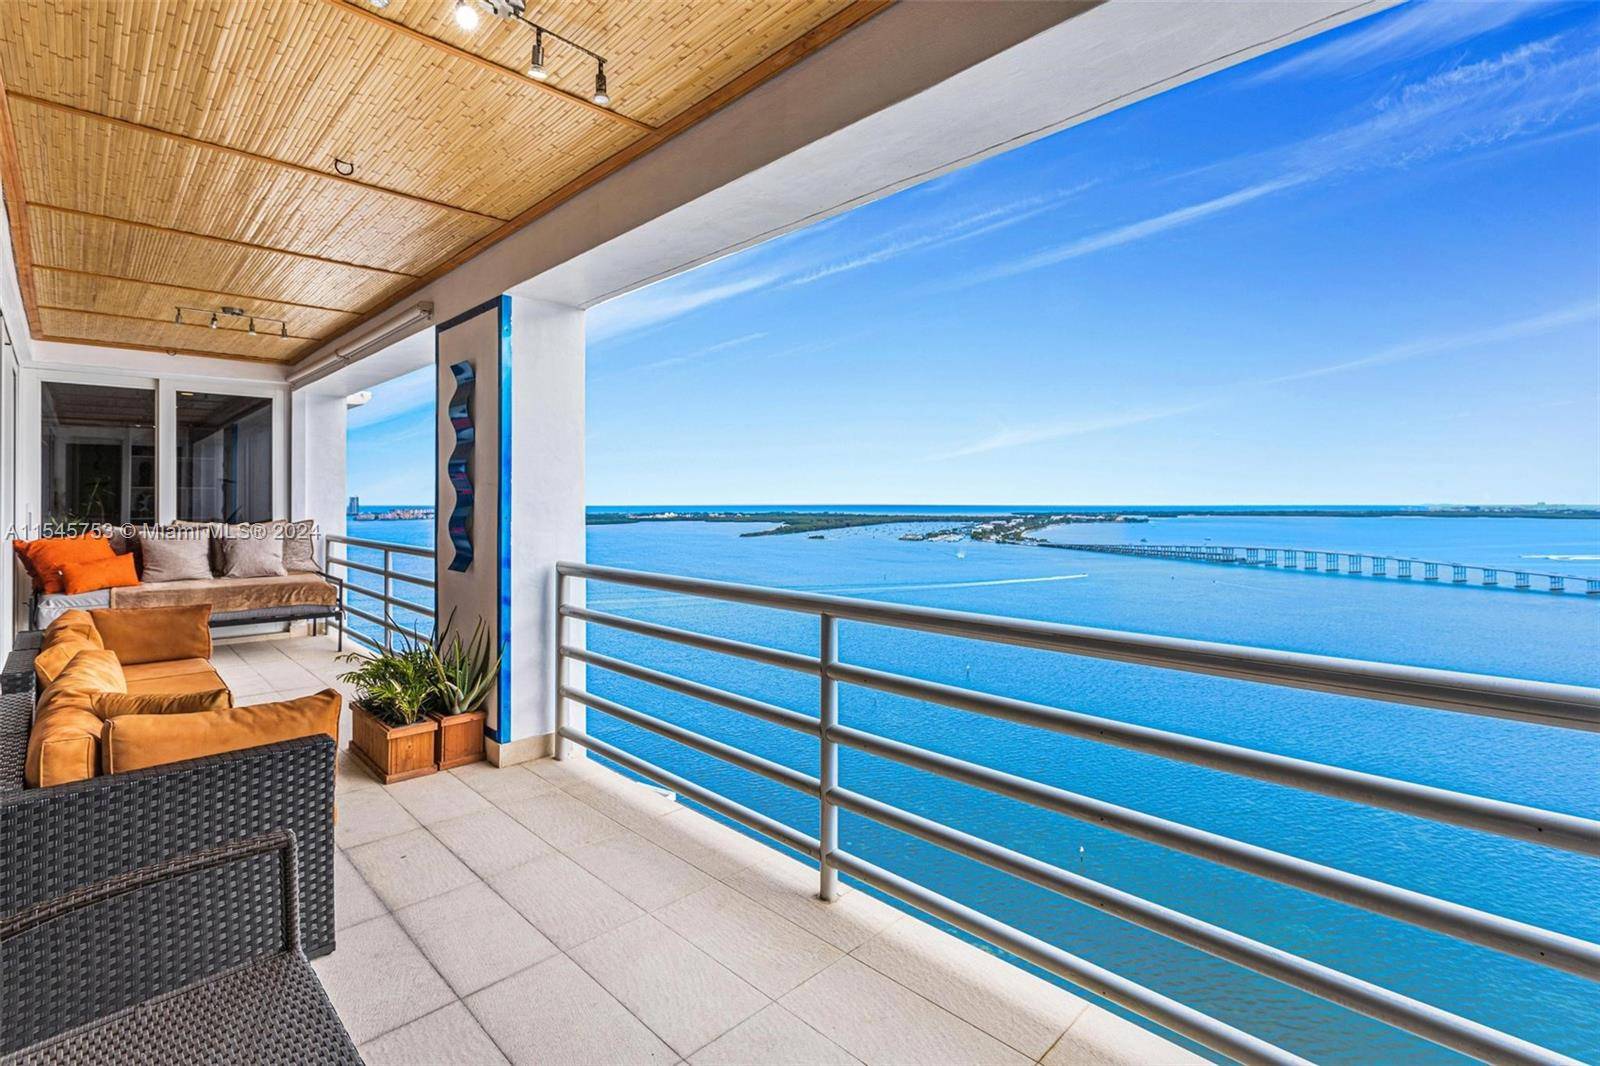 FULLY RENOVATED PENTHOUSE OVERLOOKING THE BAY WITH PANORAMIC WATER VIEWS !